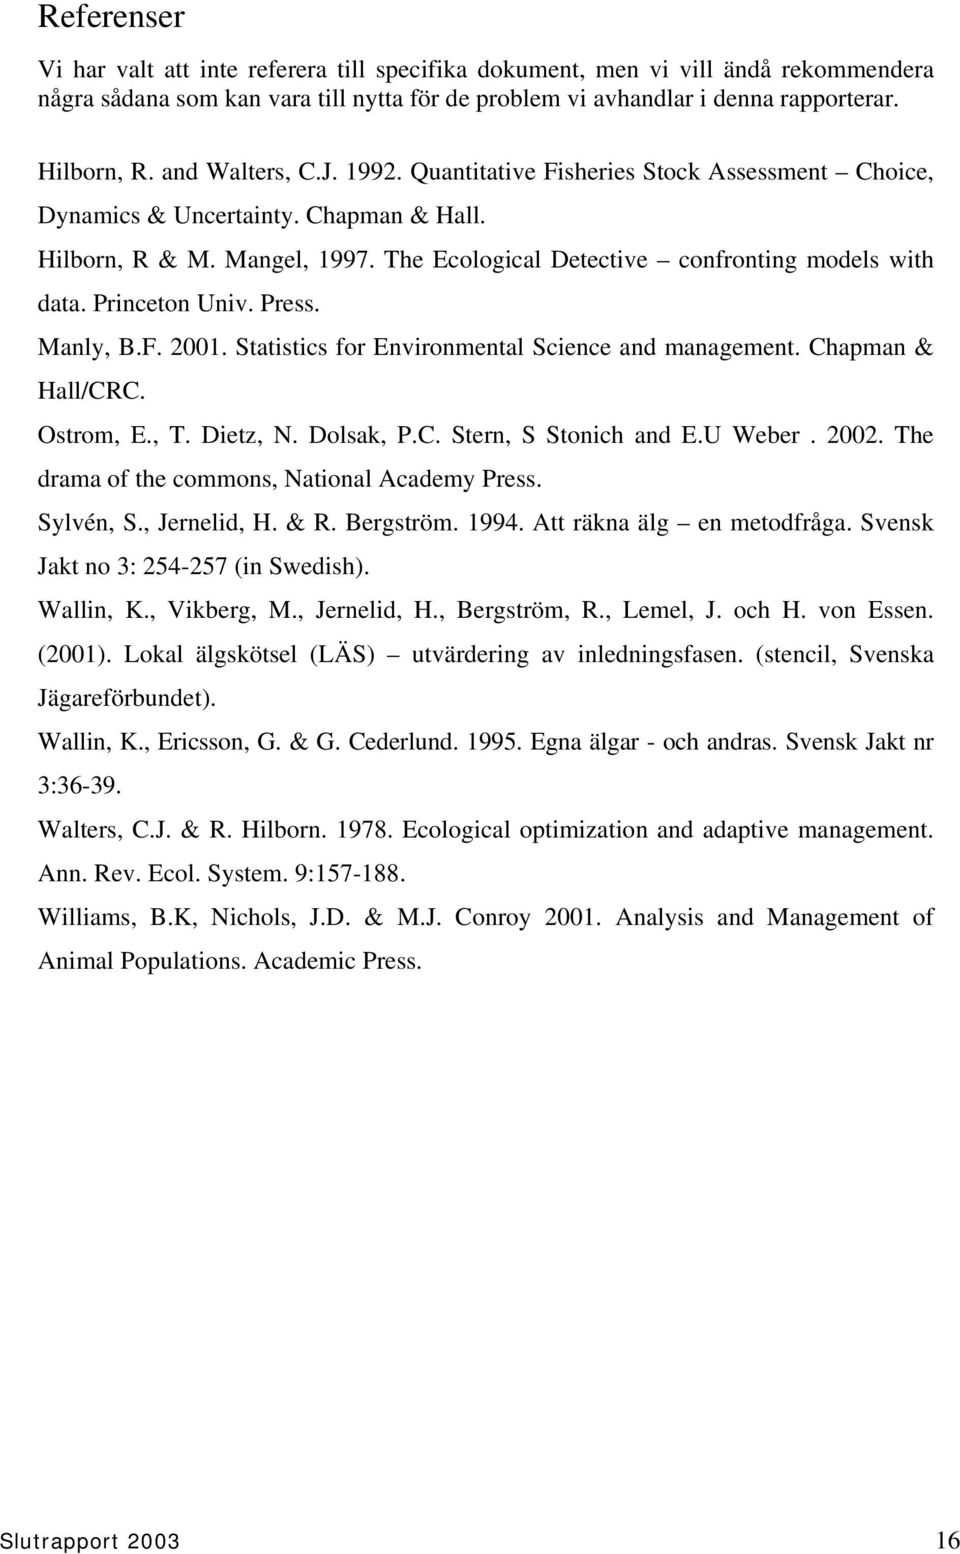 Princeton Univ. Press. Manly, B.F. 2001. Statistics for Environmental Science and management. Chapman & Hall/CRC. Ostrom, E., T. Dietz, N. Dolsak, P.C. Stern, S Stonich and E.U Weber. 2002.